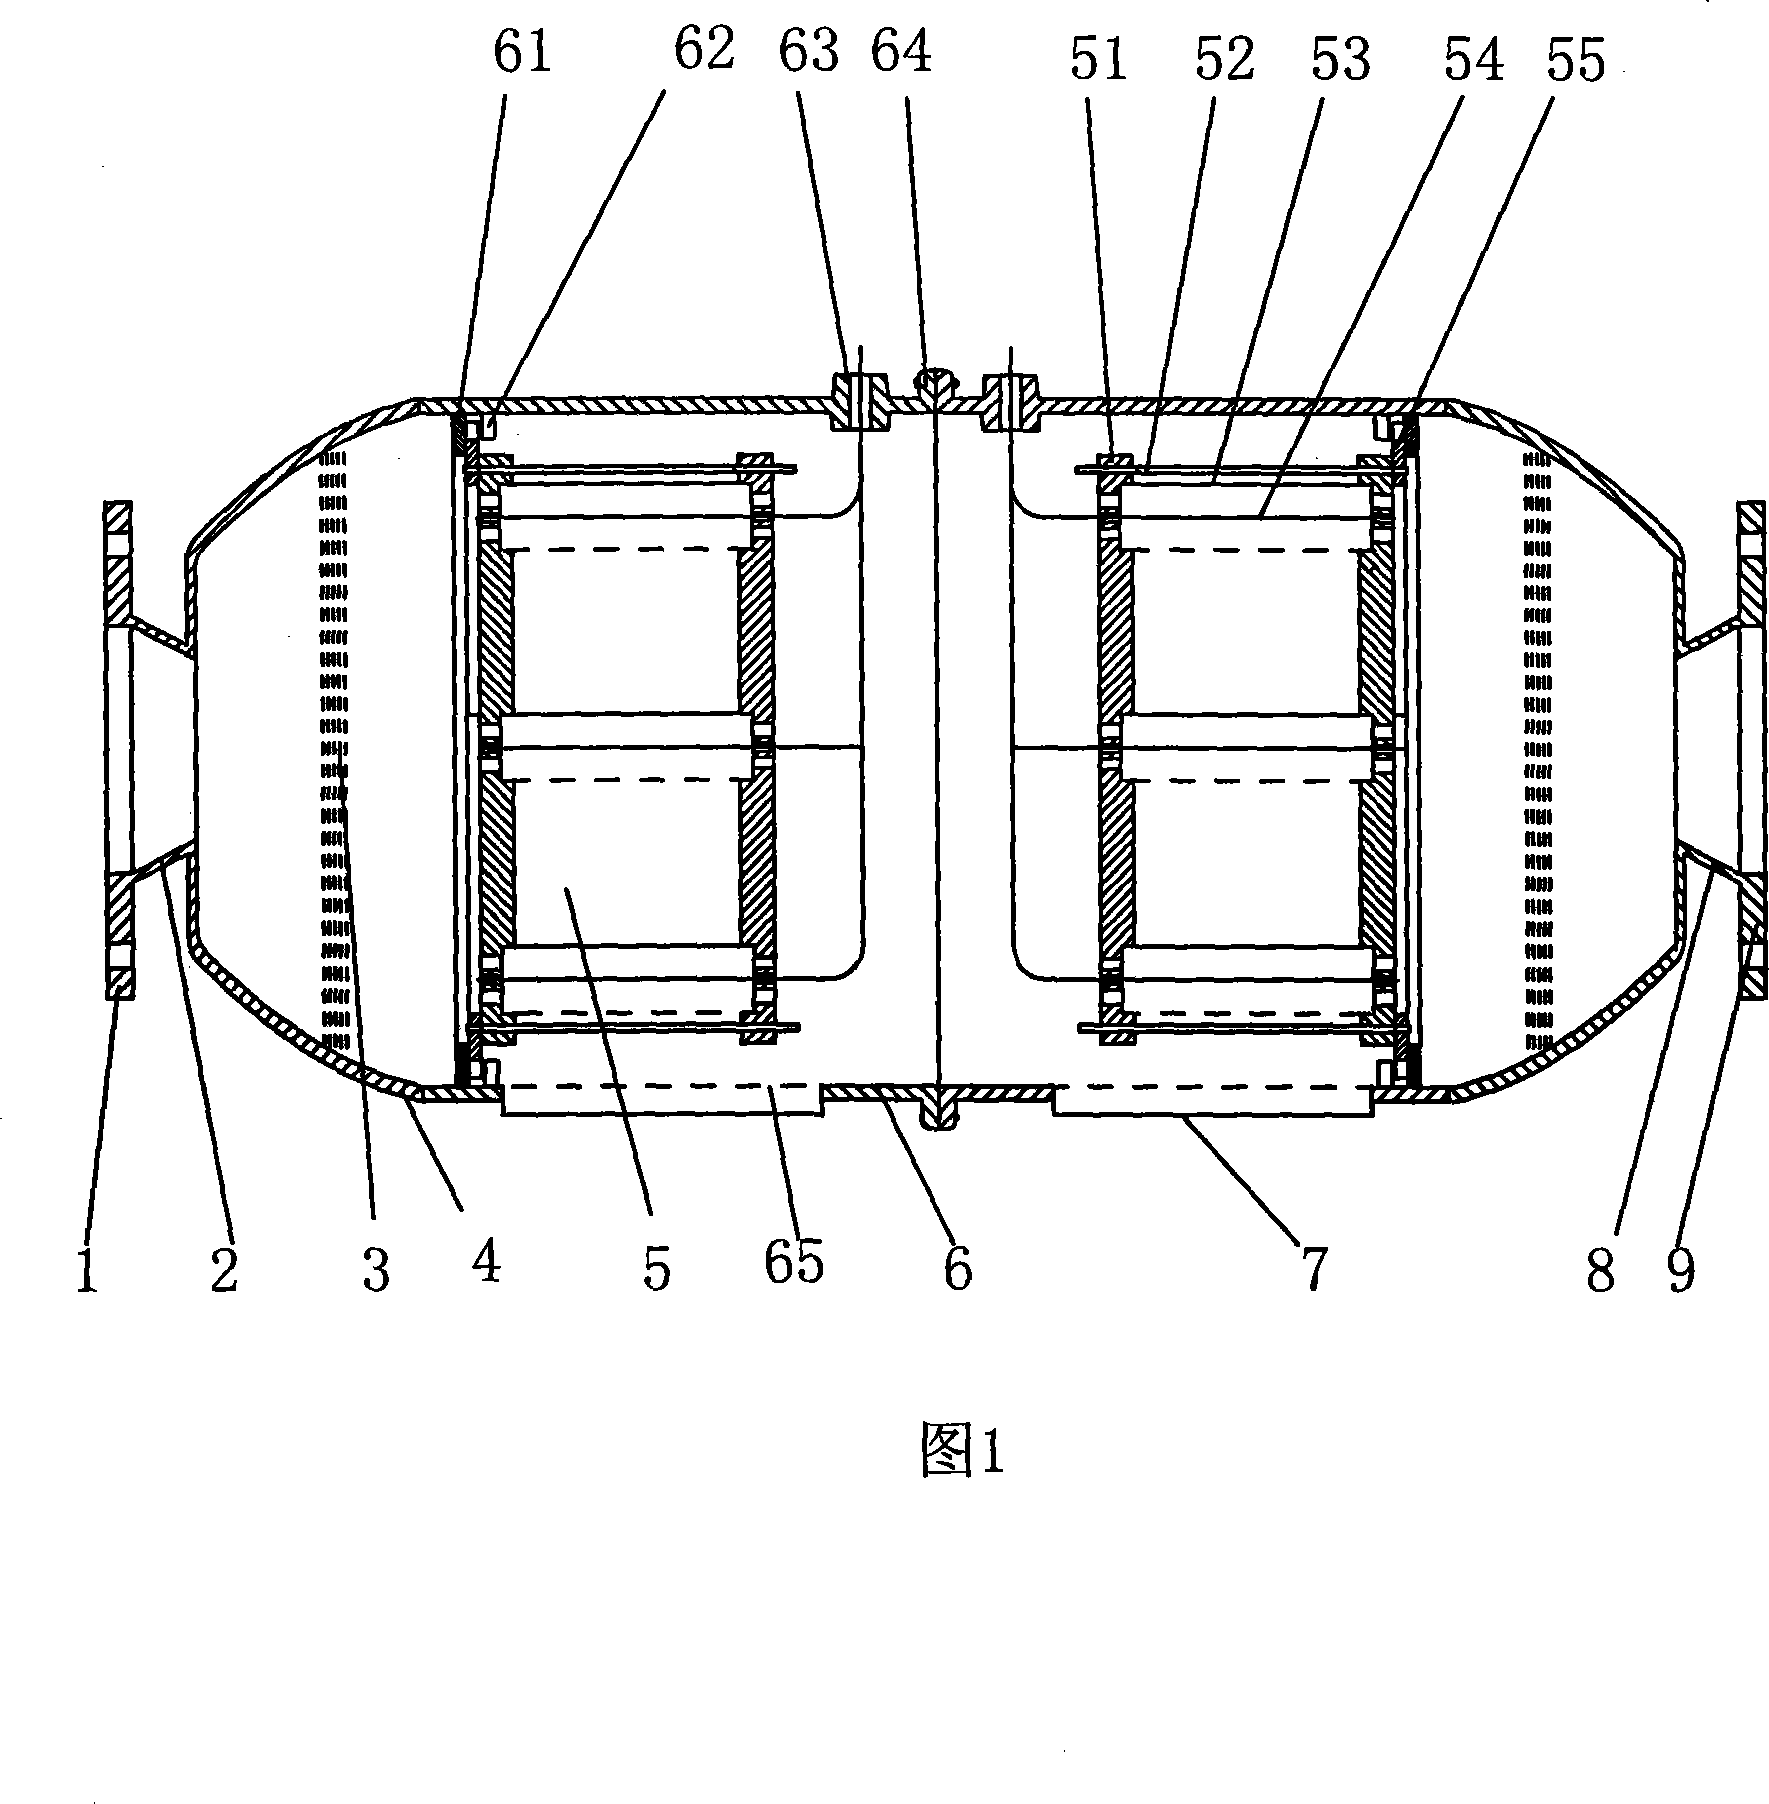 Motor engine exhaust gas cleaning device